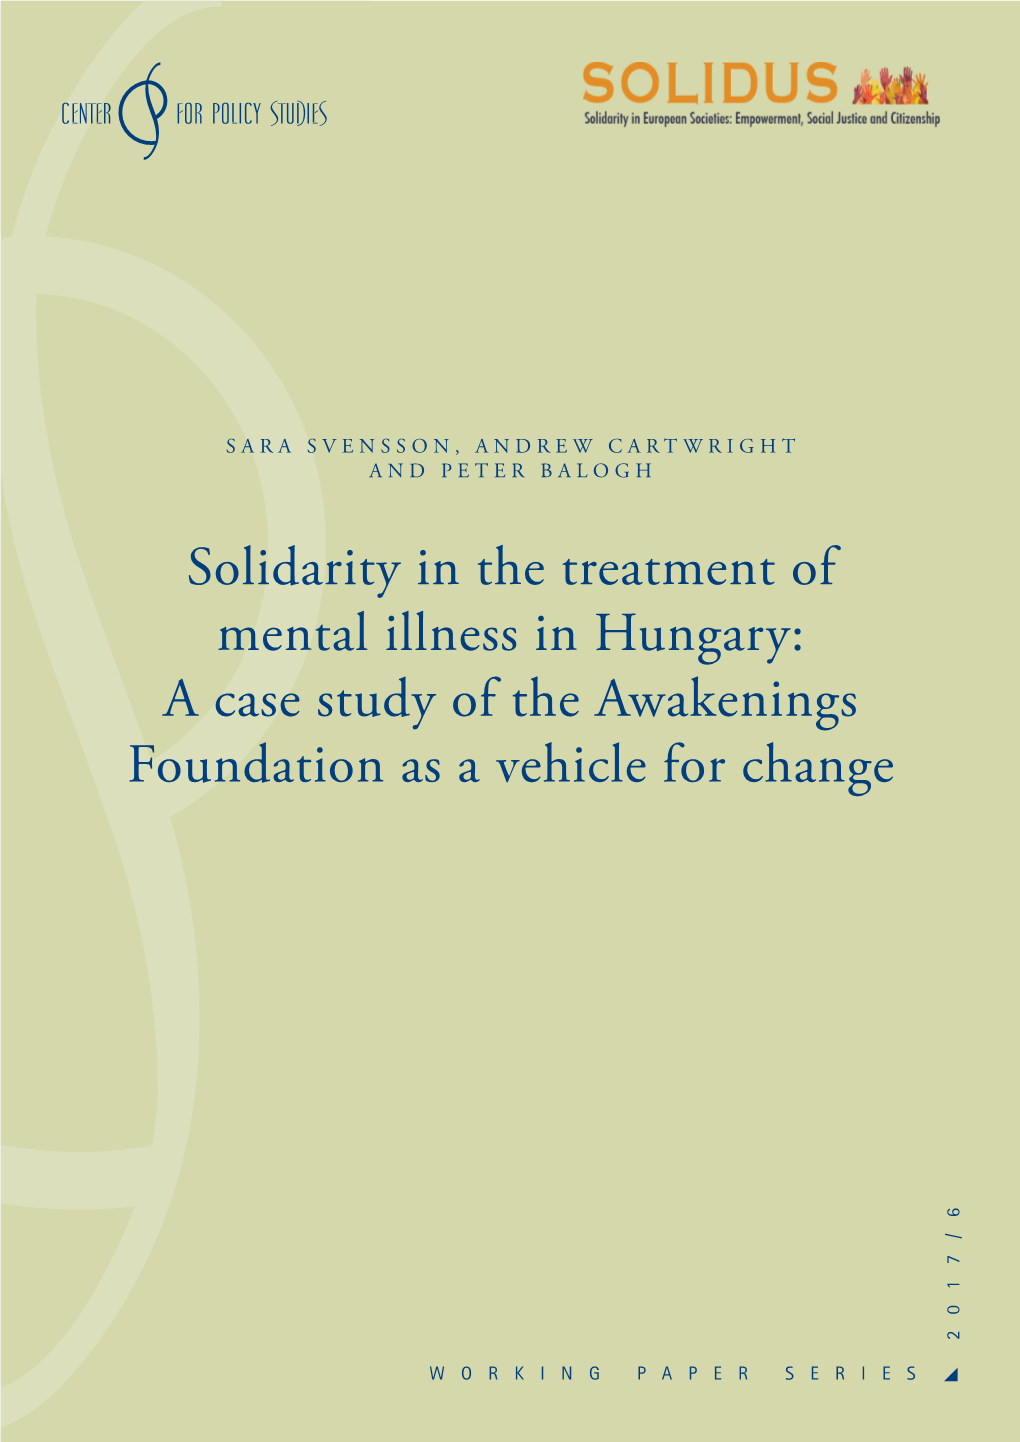 Solidarity in the Treatment of Mental Illness in Hungary: a Case Study of the Awakenings Foundation As a Vehicle for Change 2017/6